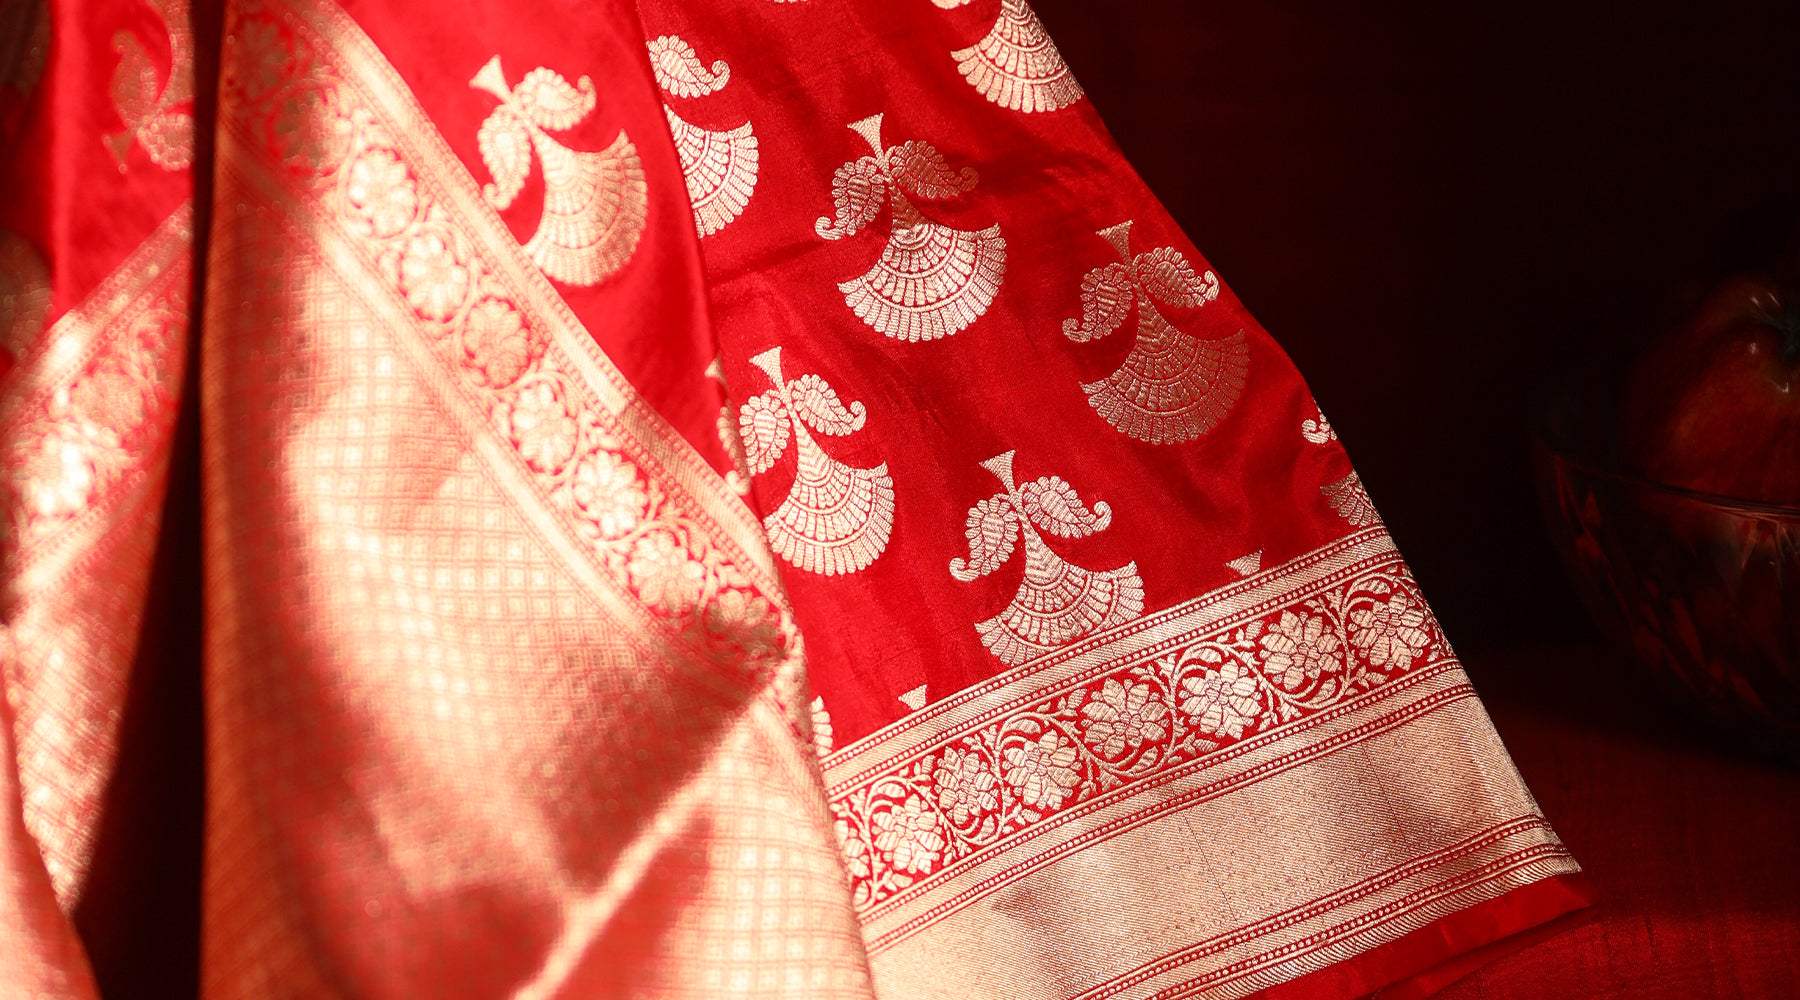 How To Style Your Bridal Banarasi Silk Sarees - Tips For Every Bride-To-Be! - Singhania's